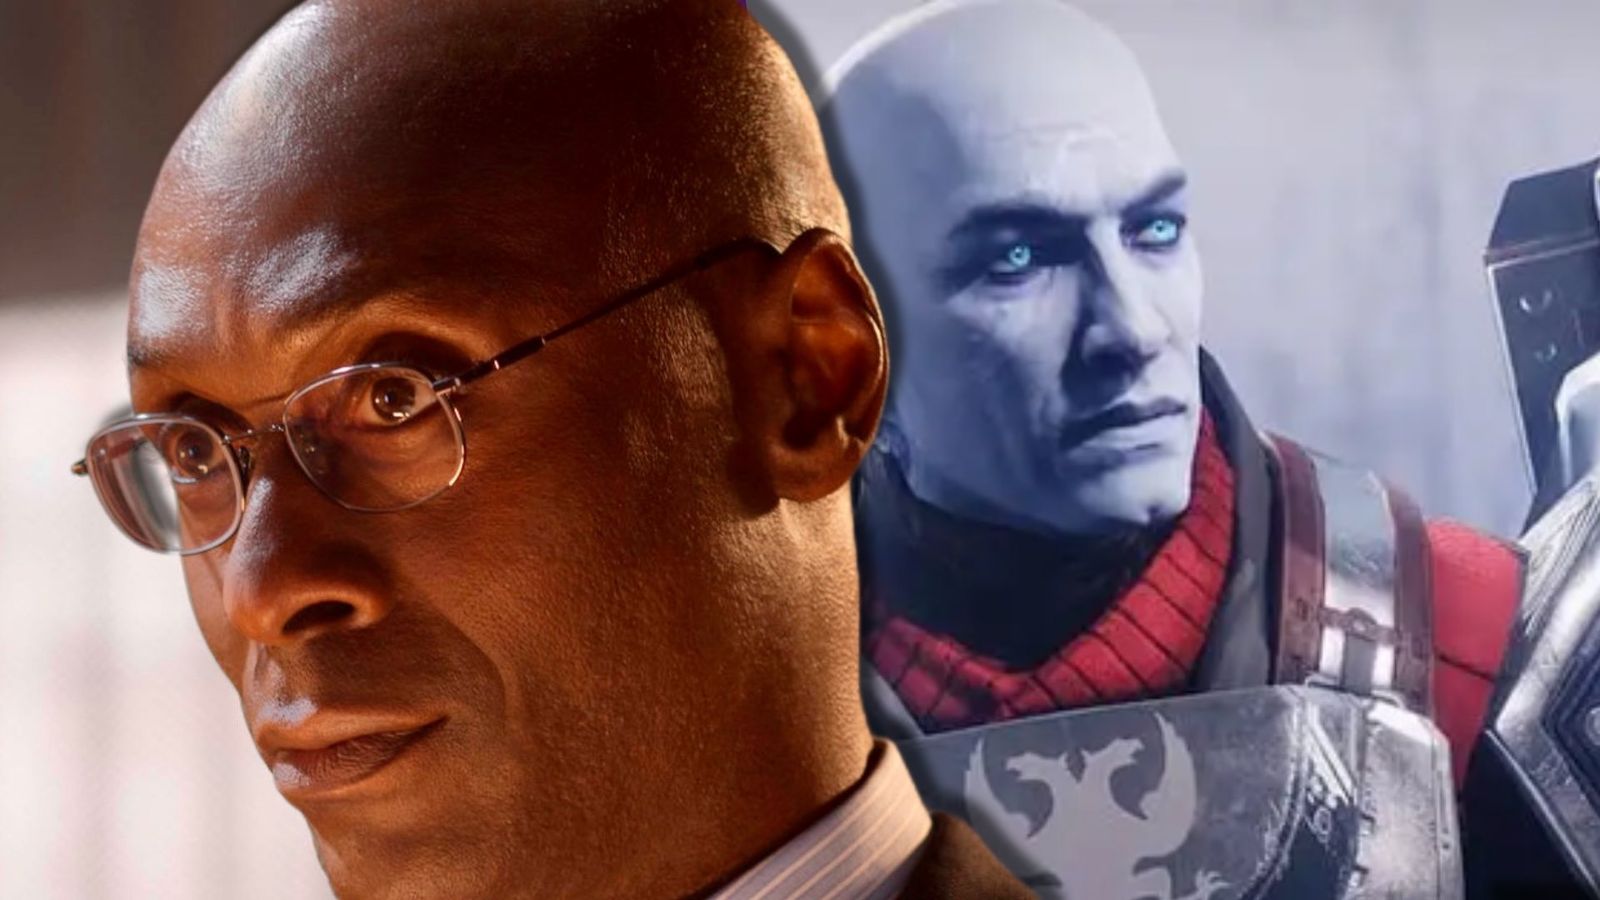 Destiny 2 actor Lance Reddick on top of Commander Zavala from the game 